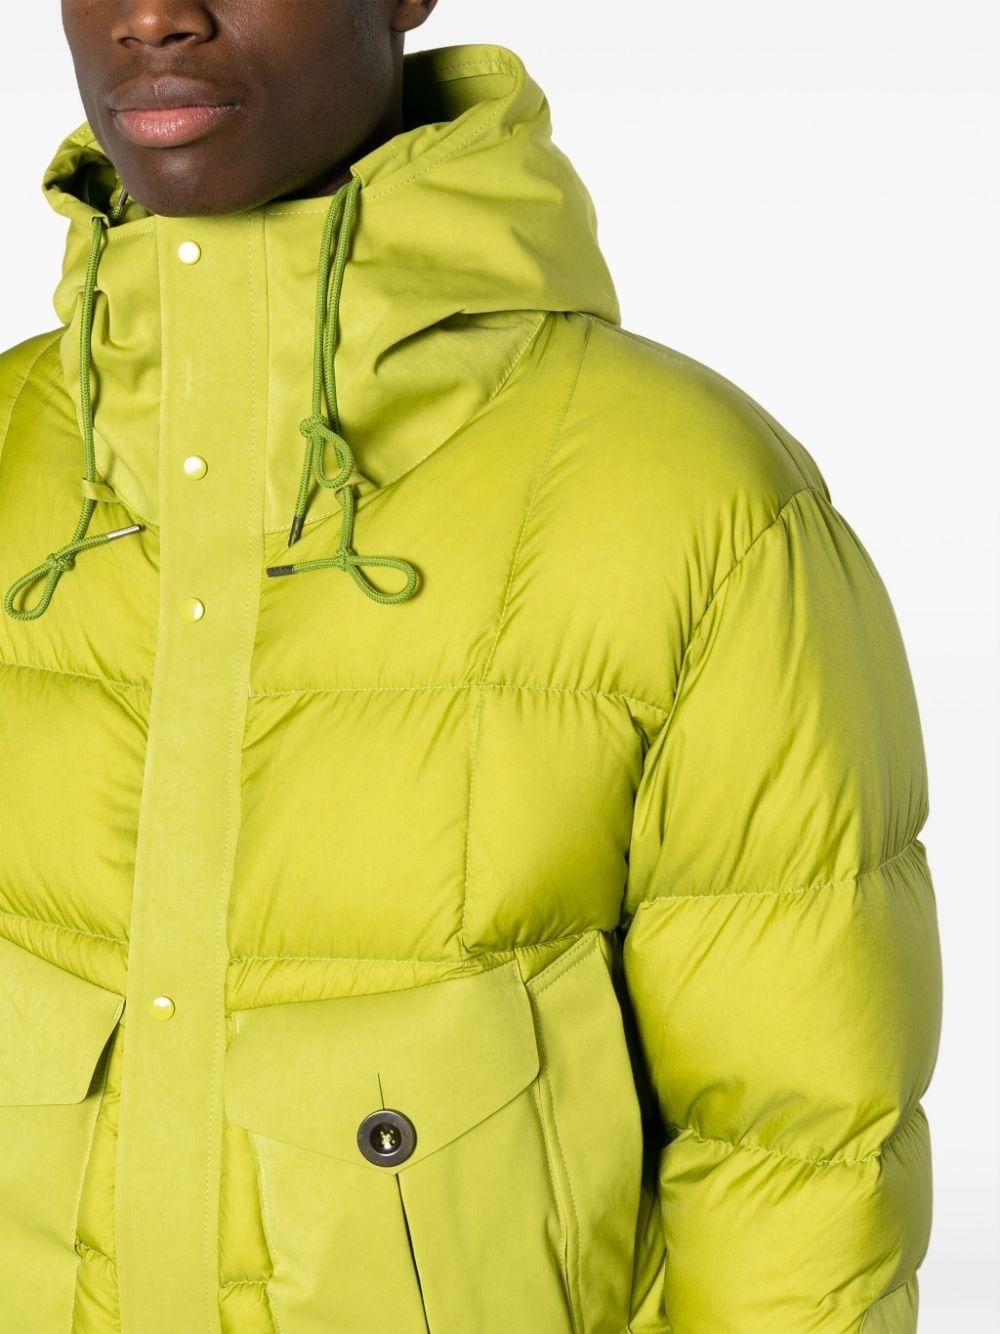 Tempest Combo down jacket - 5